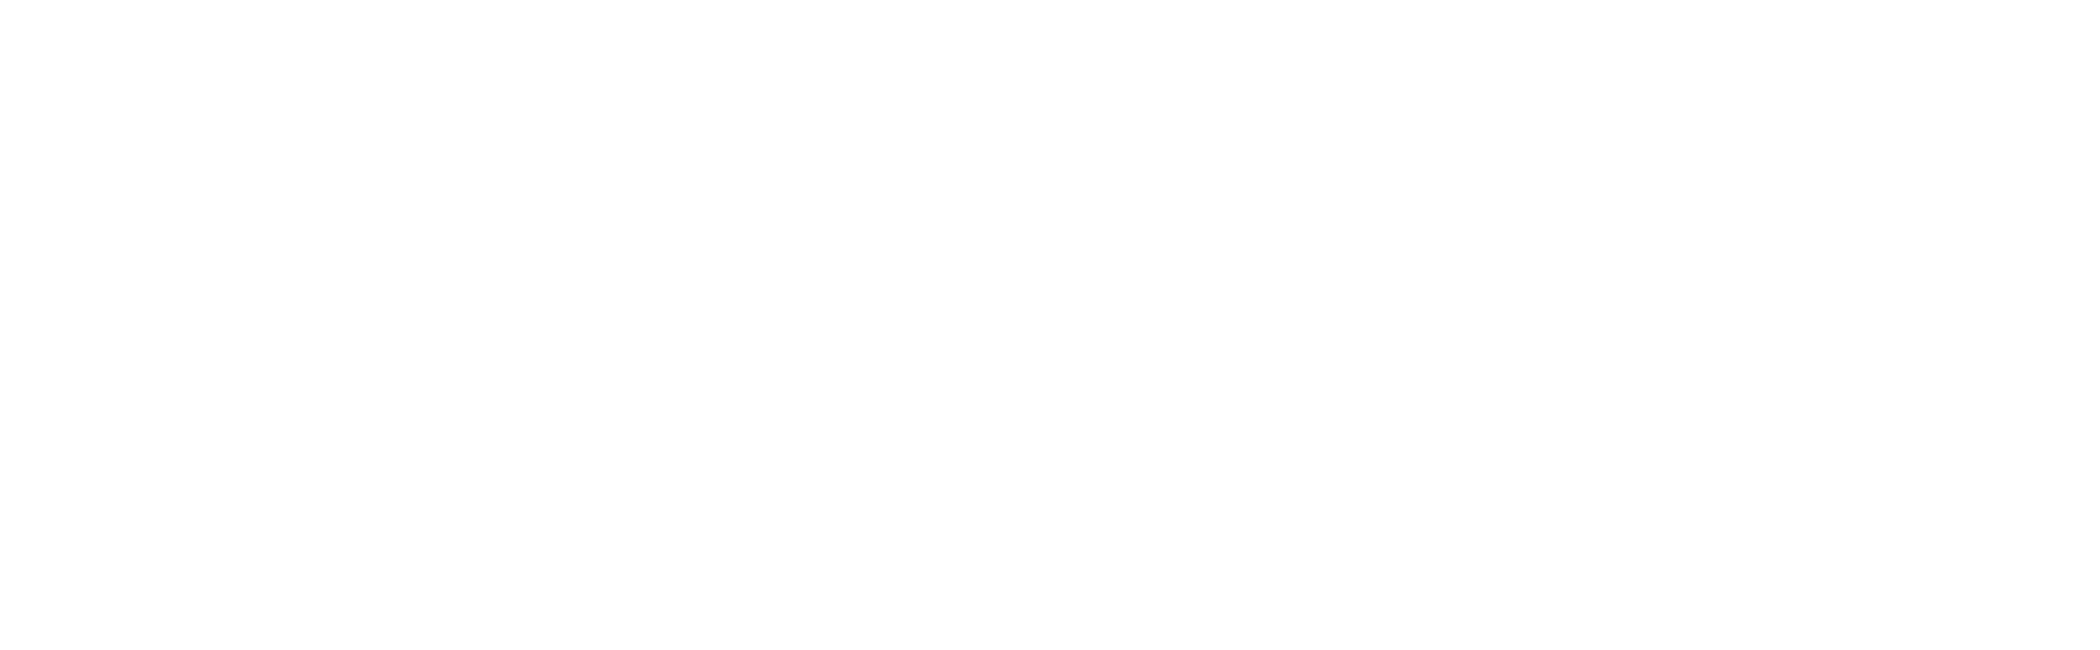 Jester's Quest